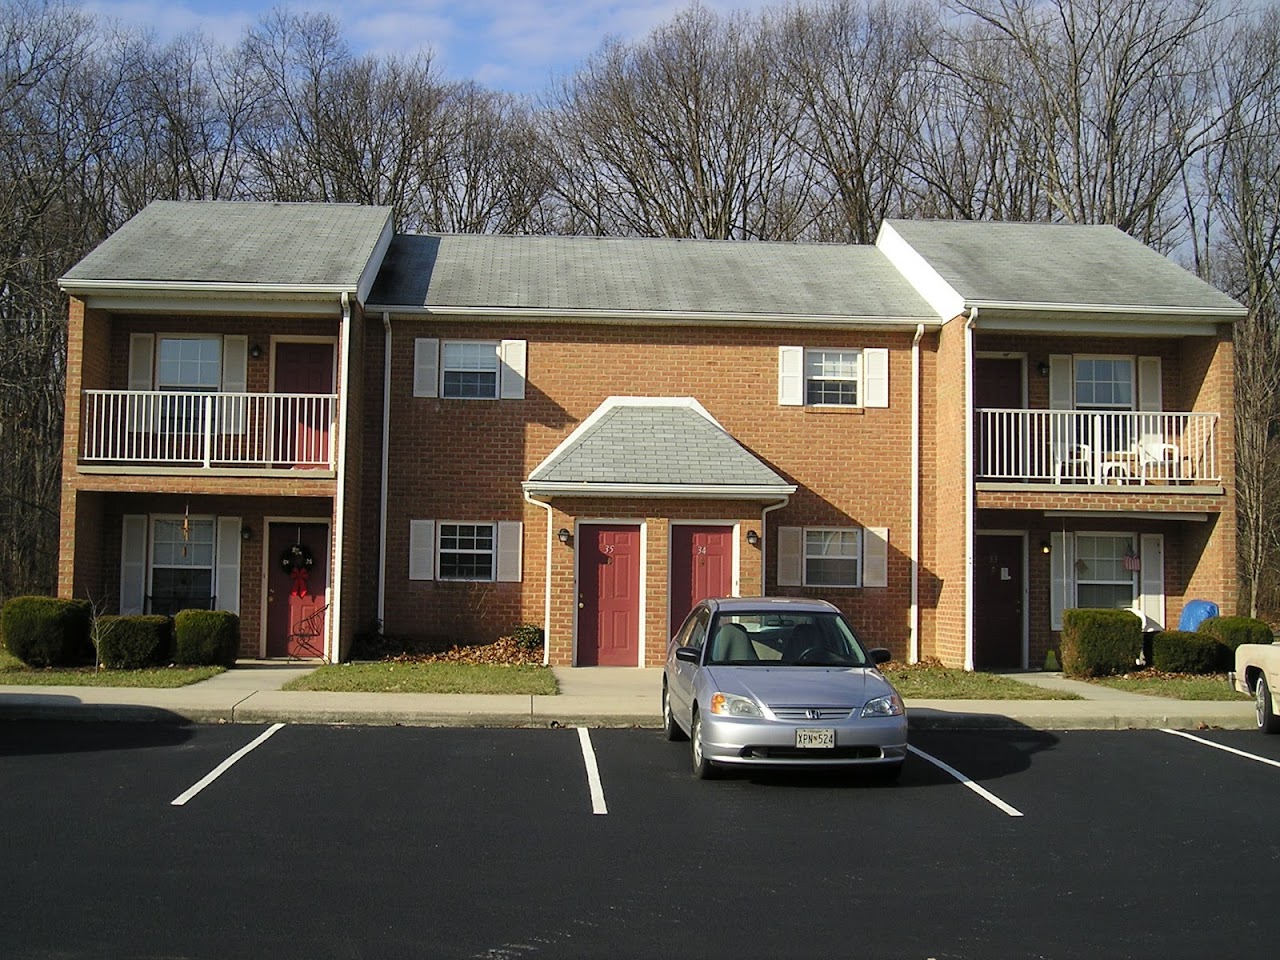 Photo of MARLOWE GARDEN APTS. Affordable housing located at 65 BOWIE DR FALLING WATERS, WV 25419